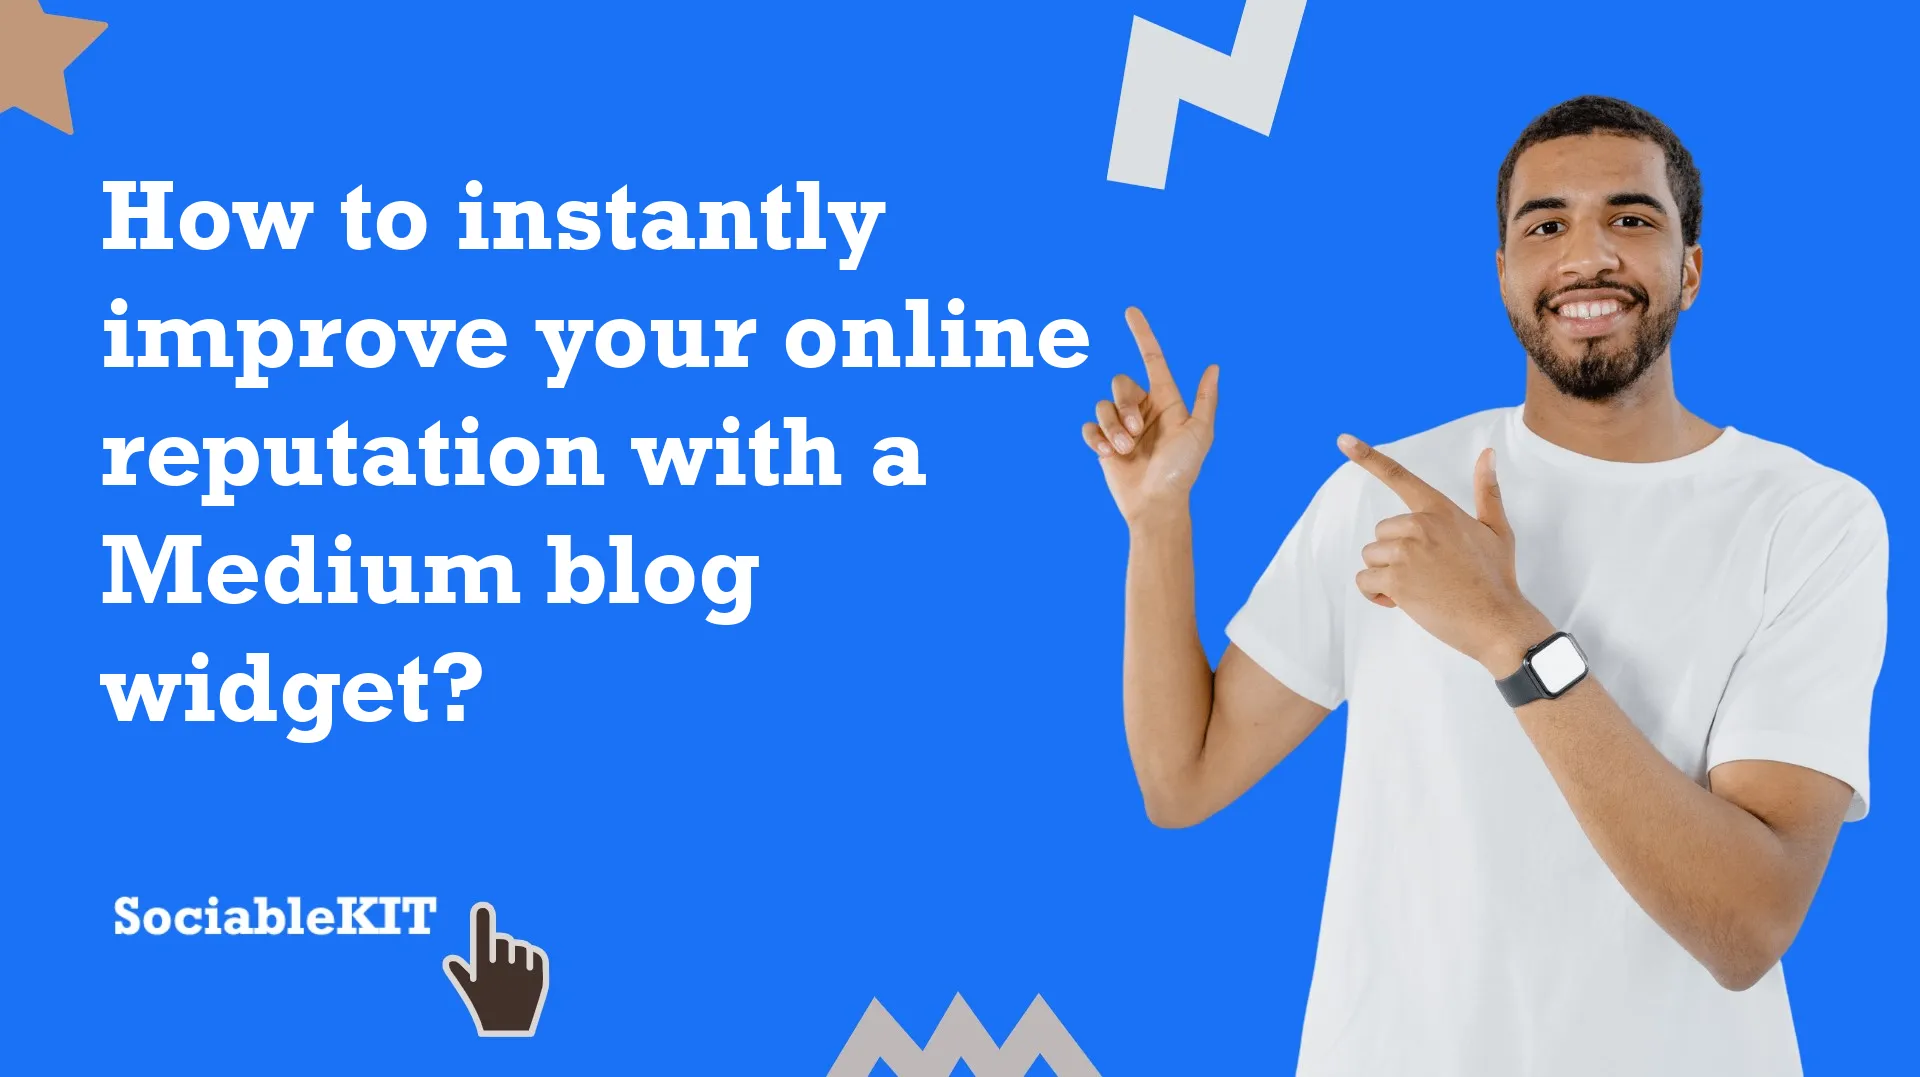 How to instantly improve your online reputation with a Medium blog widget?